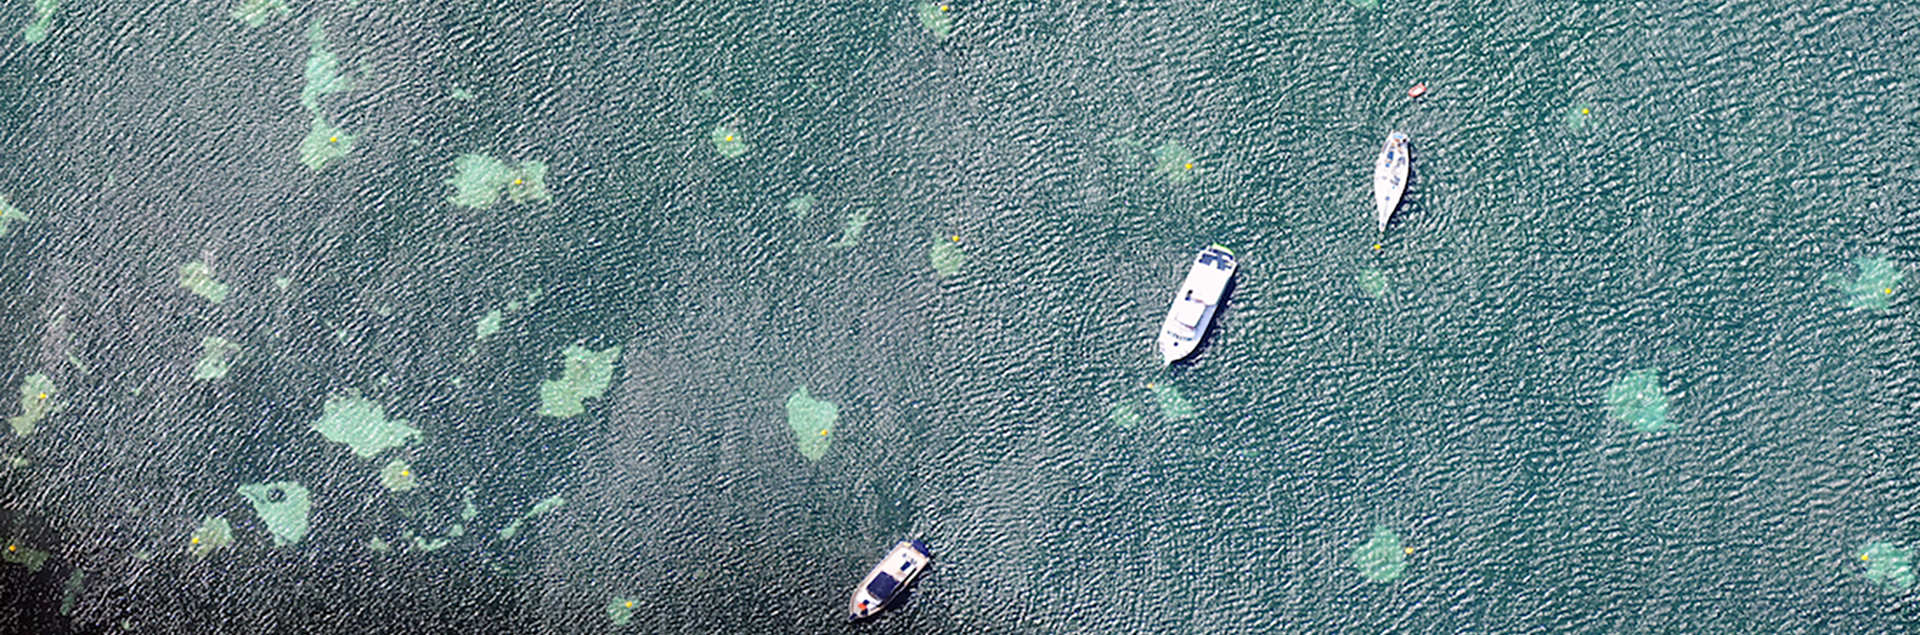 A view of 3 boats moored in a seagrass meadow off Rottnet Island